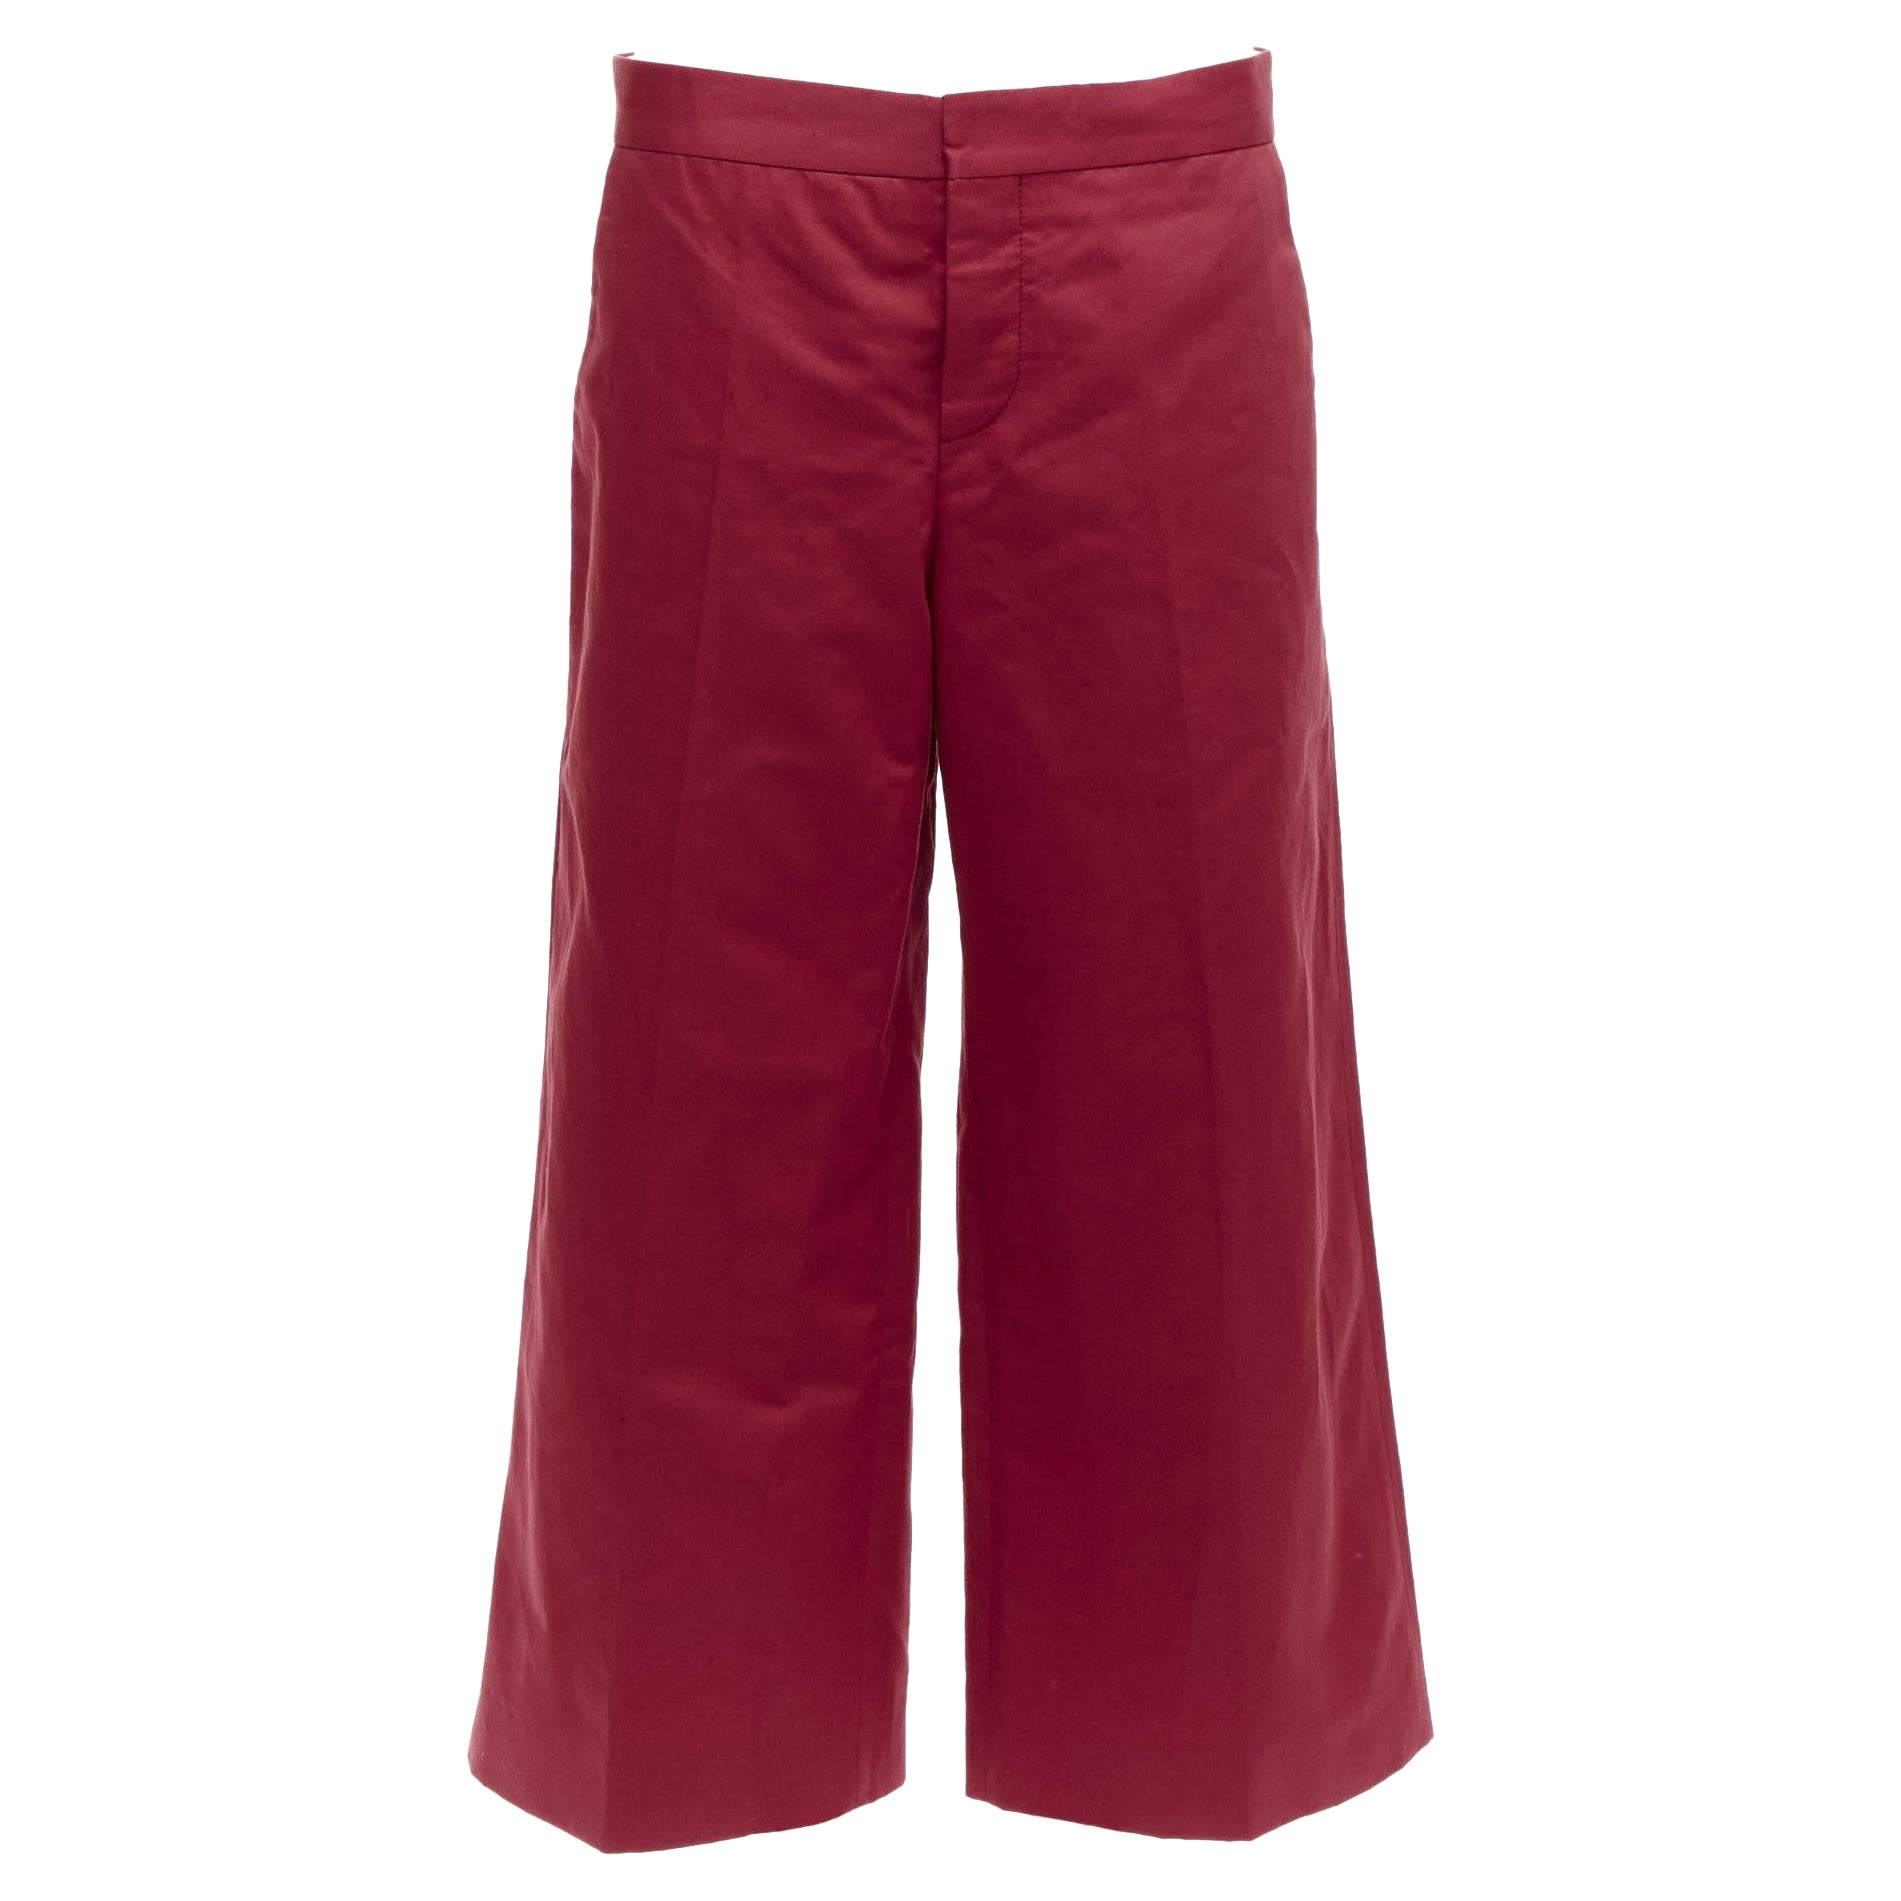 MARNI red cotton linen minimal classic wide cropped pants IT40 S For Sale